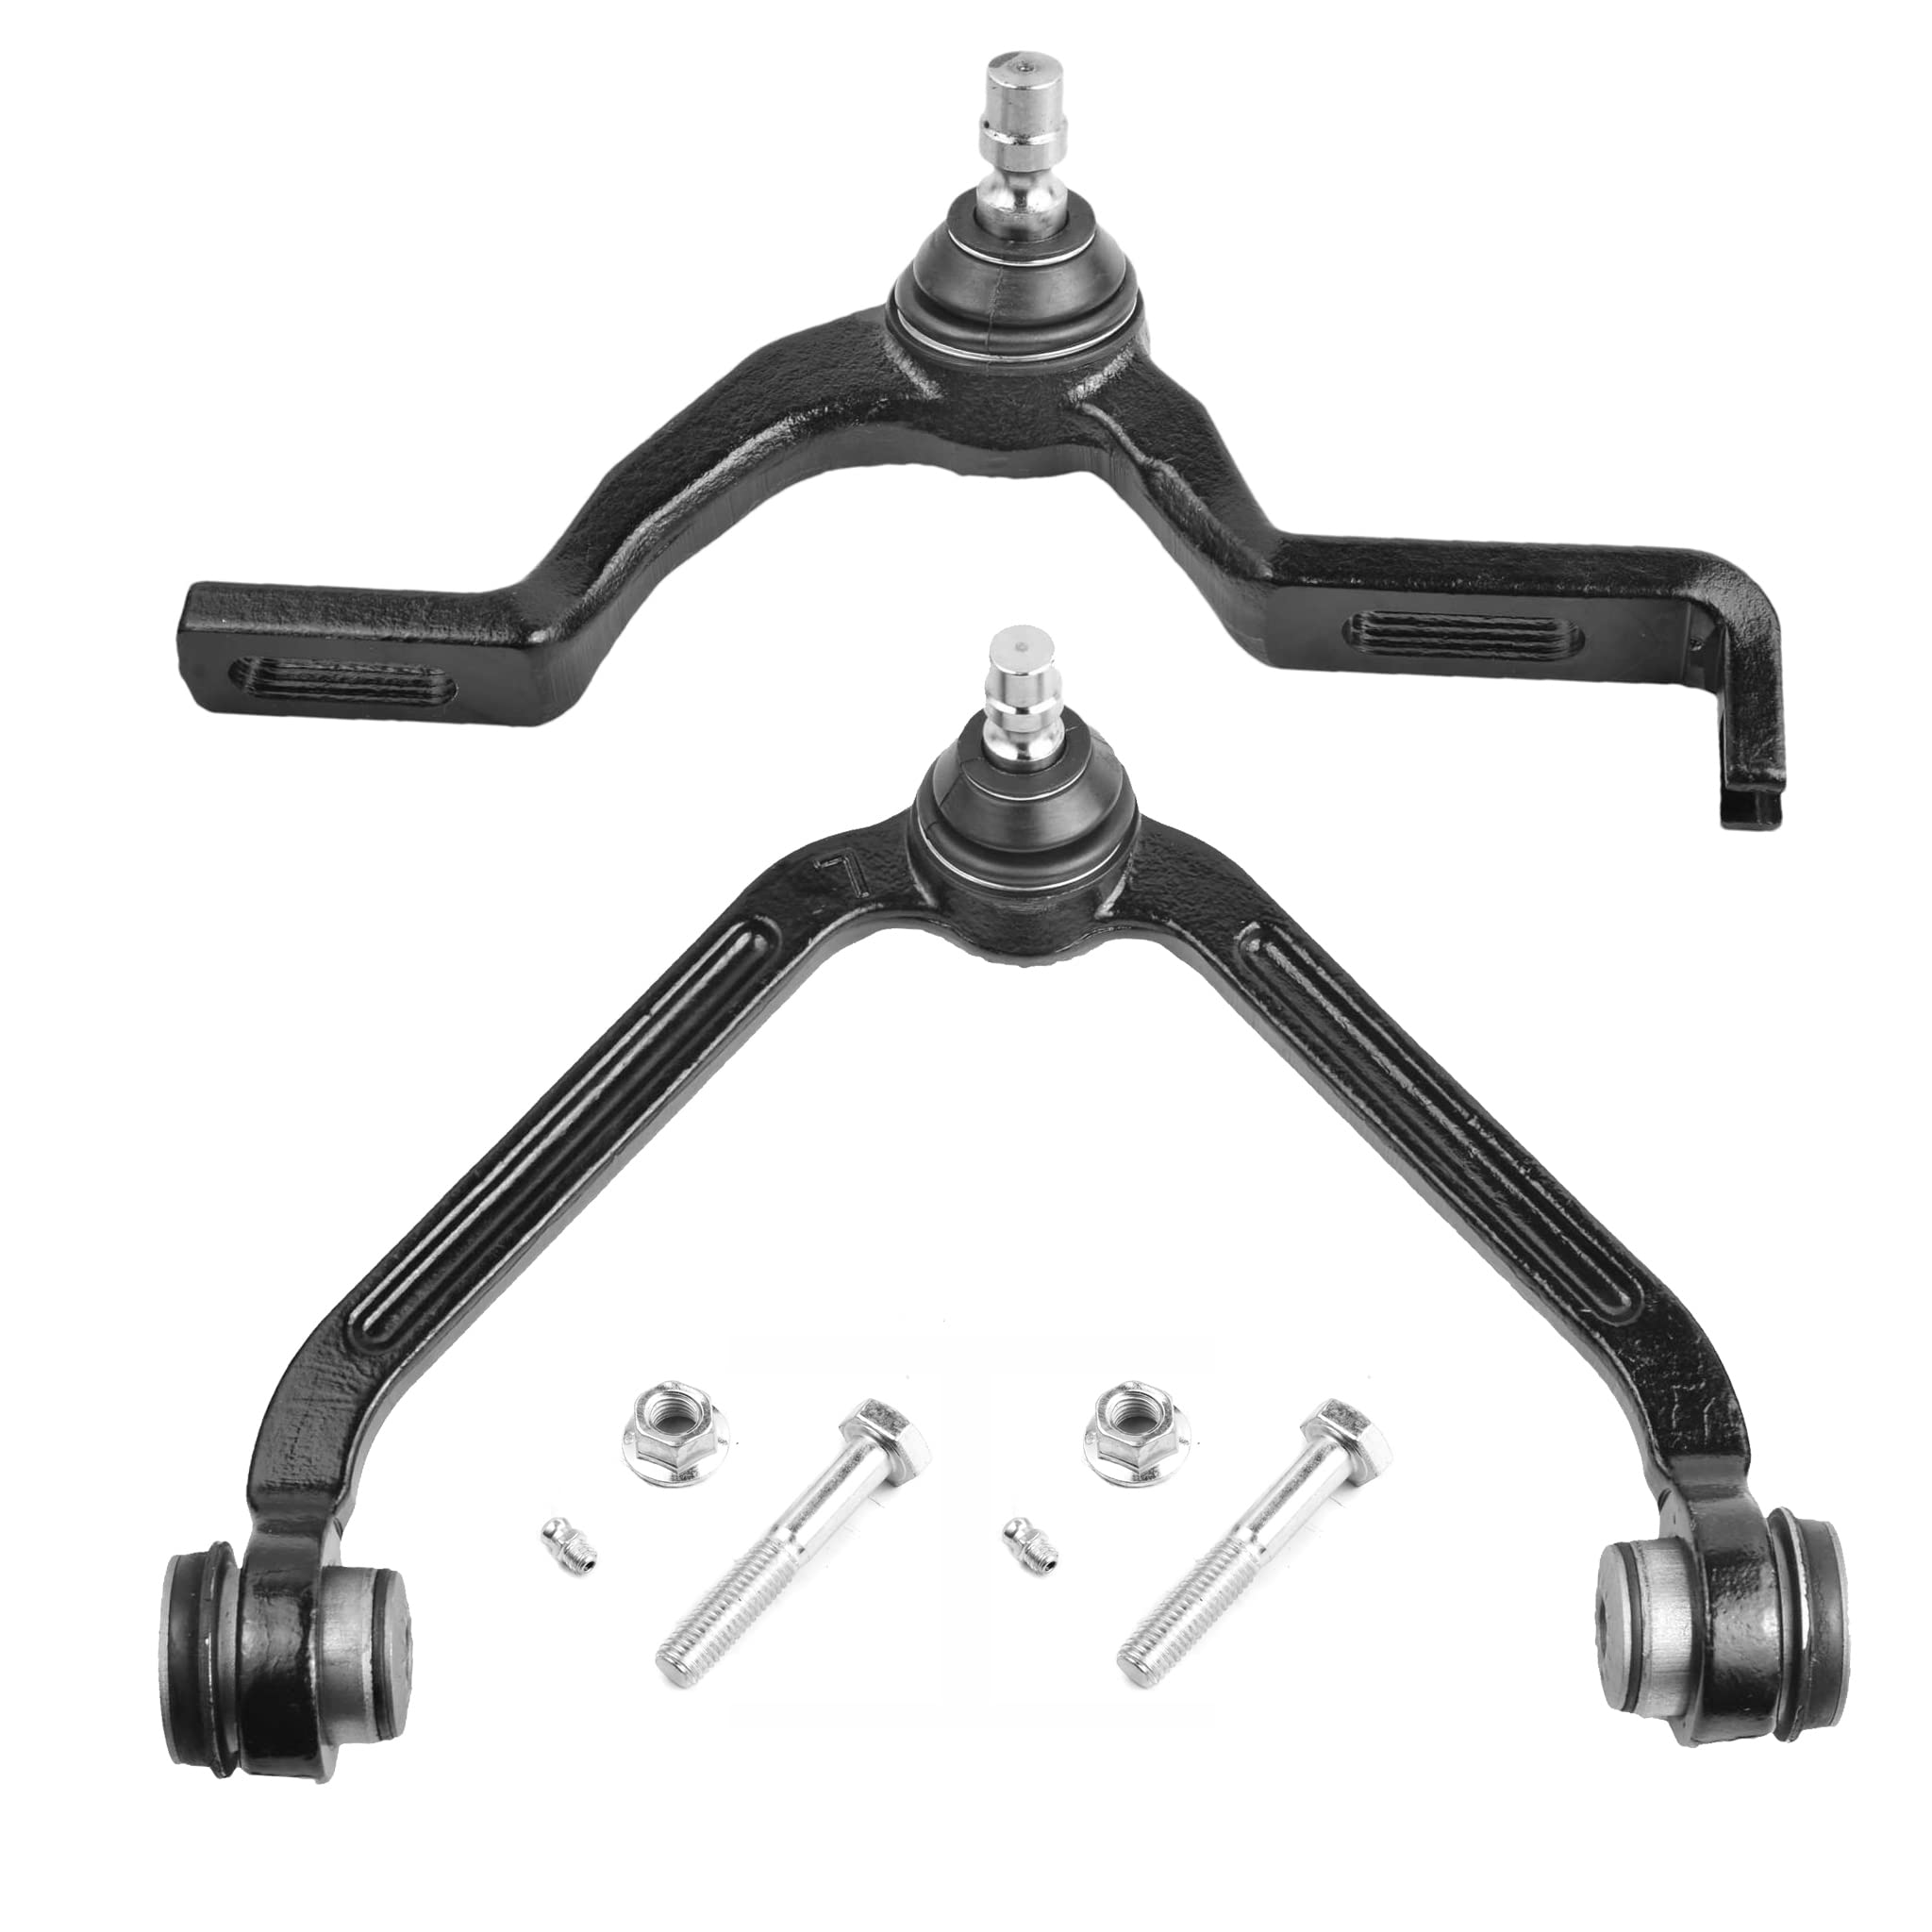 Compatibility Issue: 2005 Ford Explorer Sport Trac’s Passenger Side Control Arm Misfit